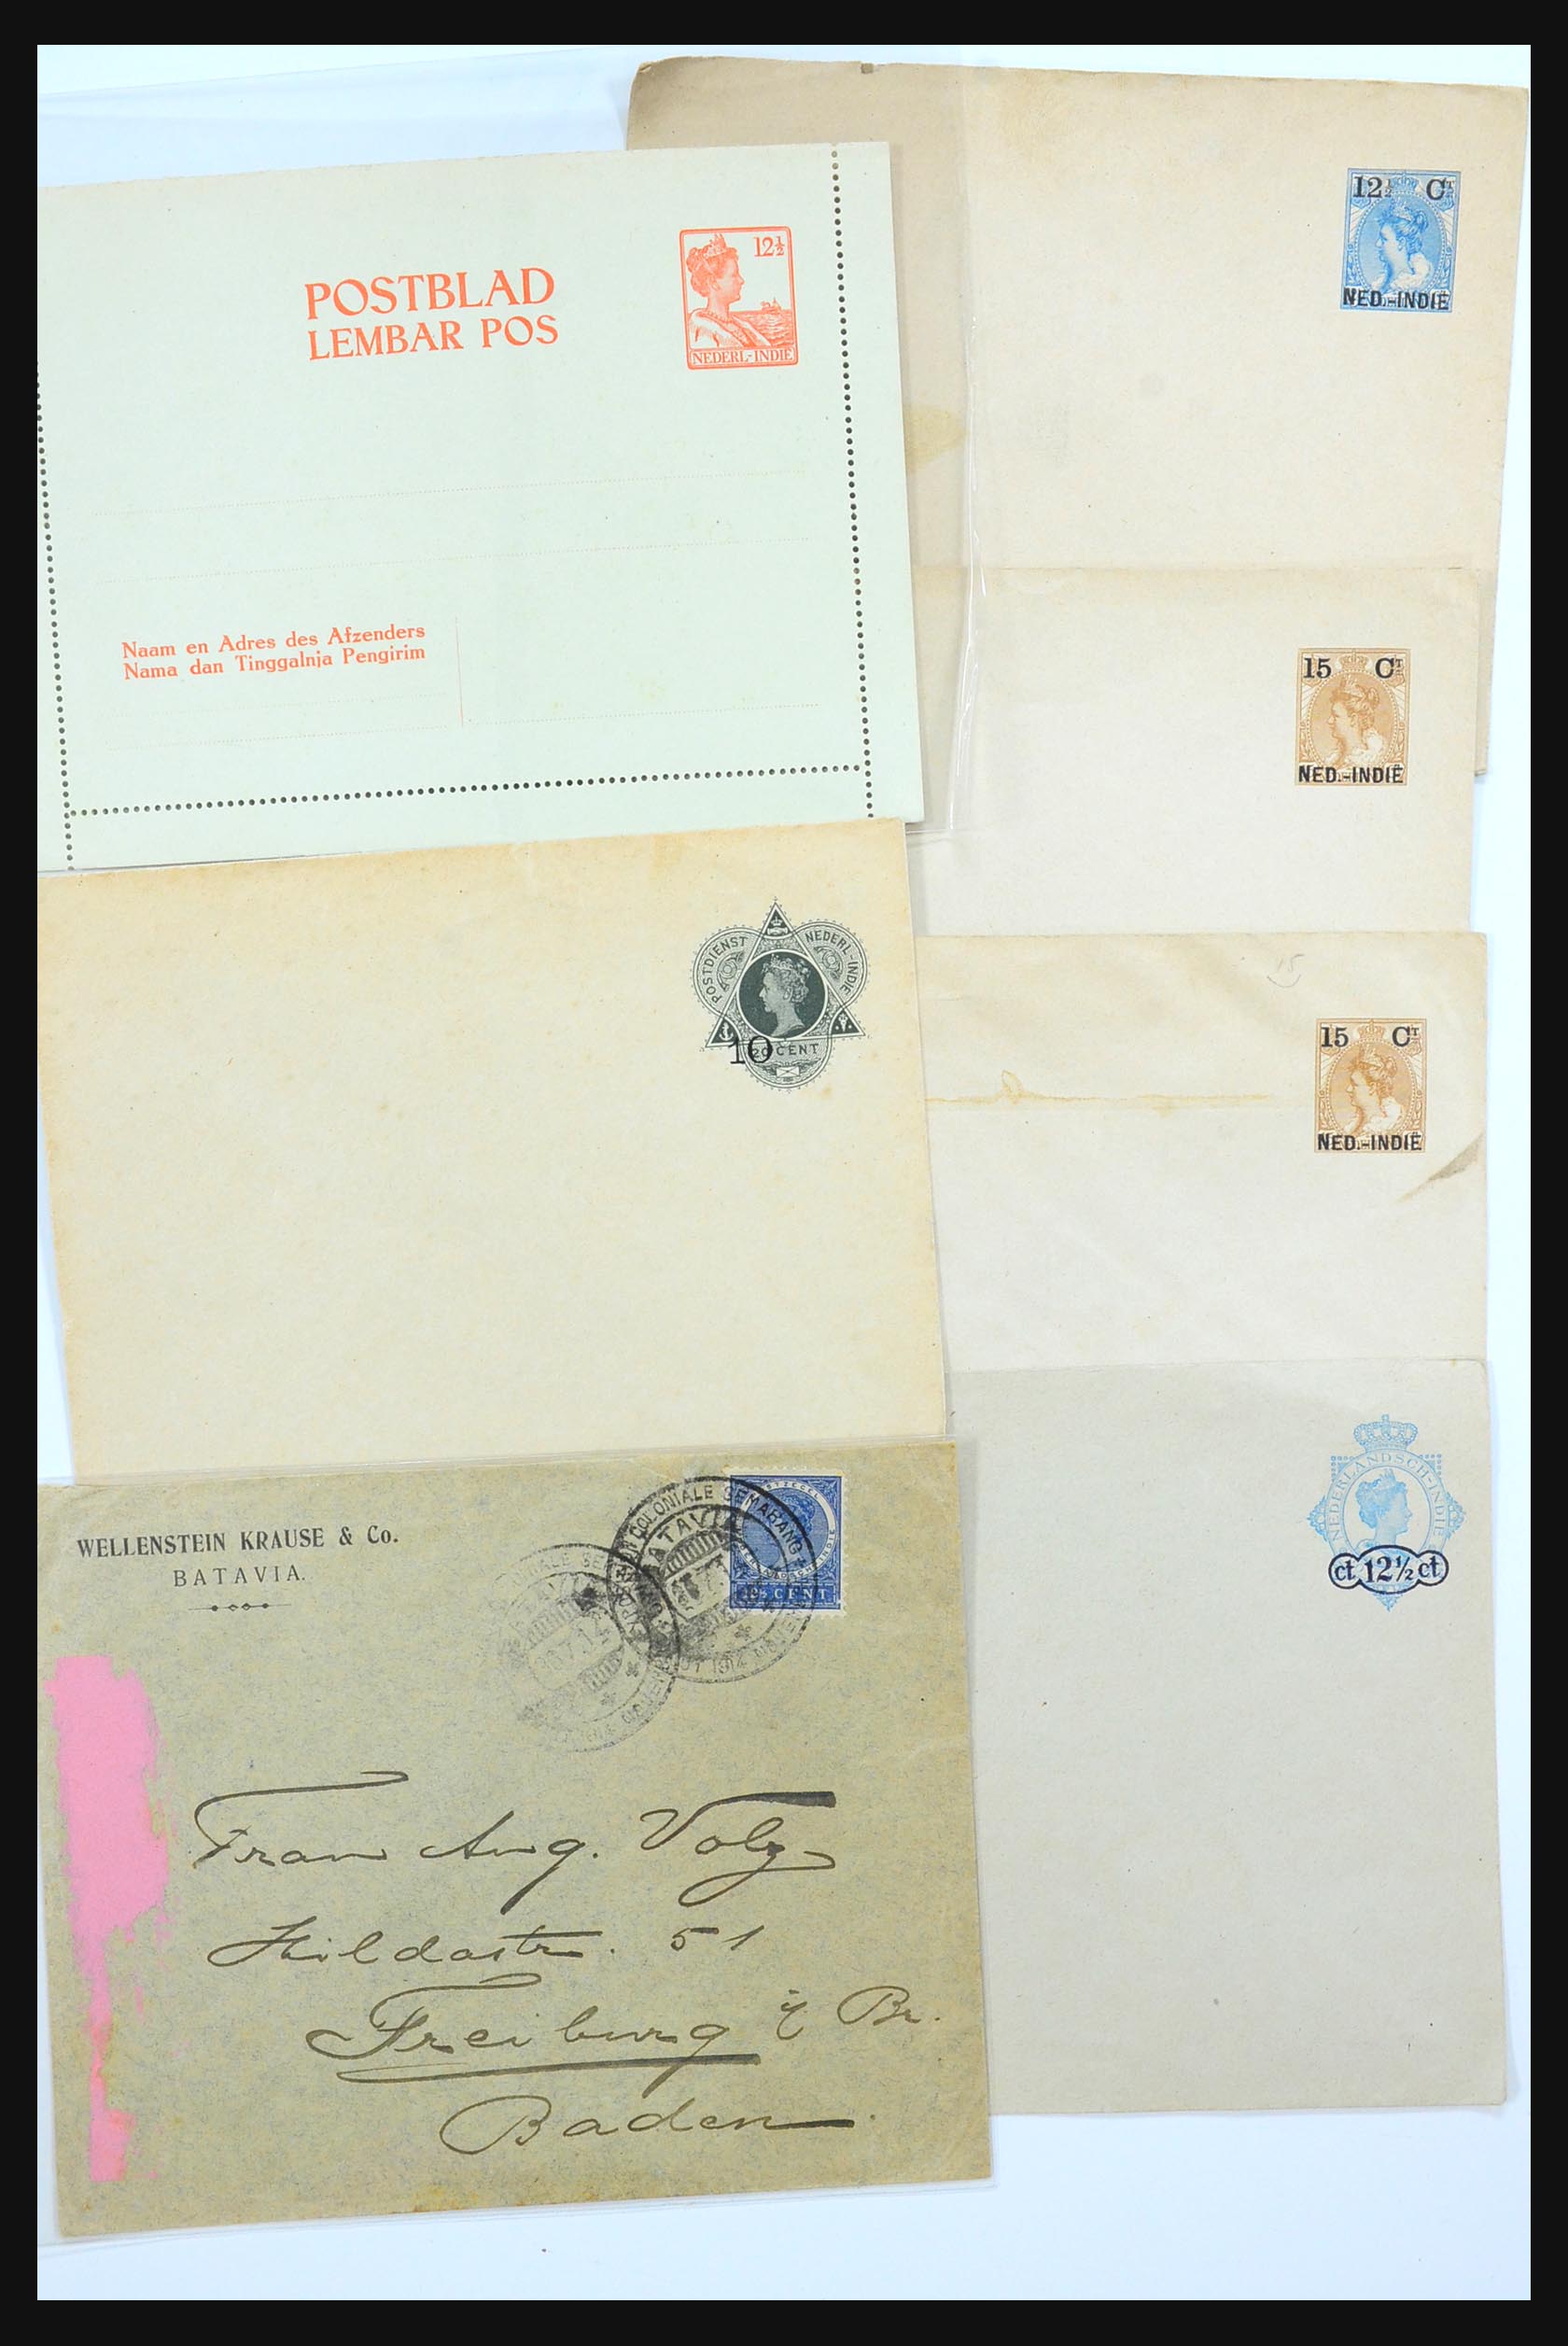 31361 072 - 31361 Netherlands Indies covers 1880-1950.